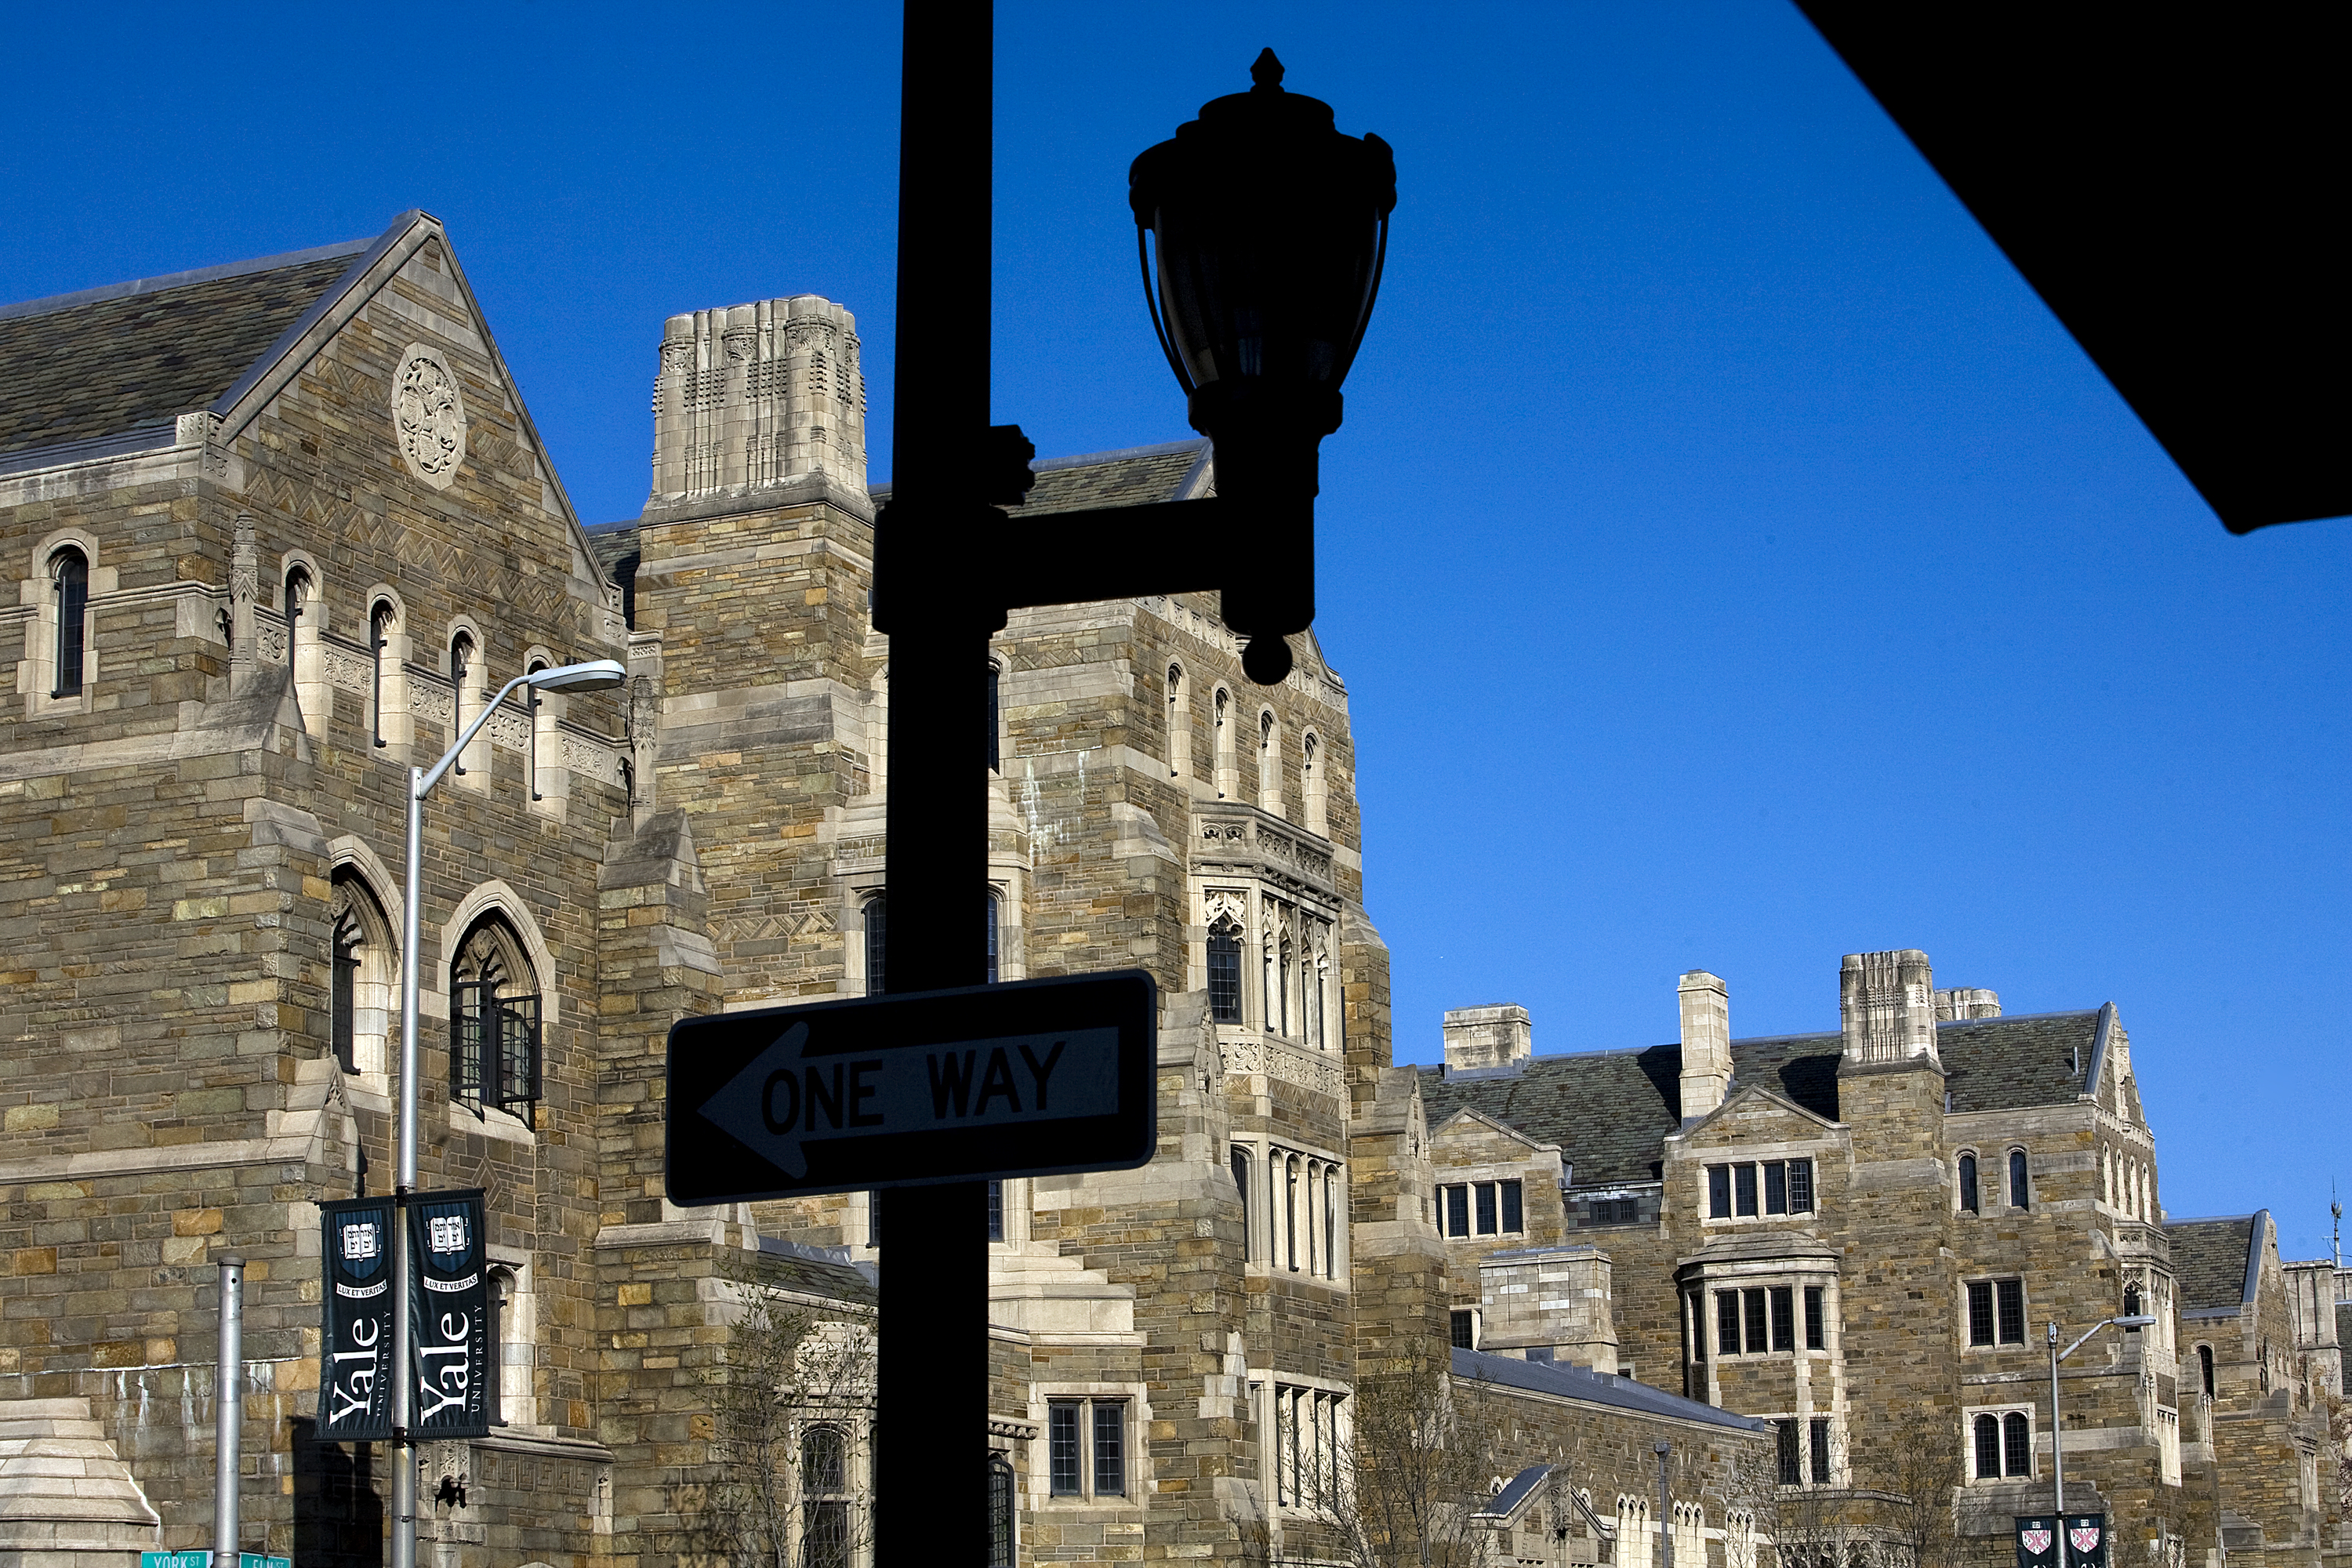 Buildings on the campus of Yale University are shown April 15, 2008 in New Haven, Connecticut. (Christopher Capozziello—Getty Images)